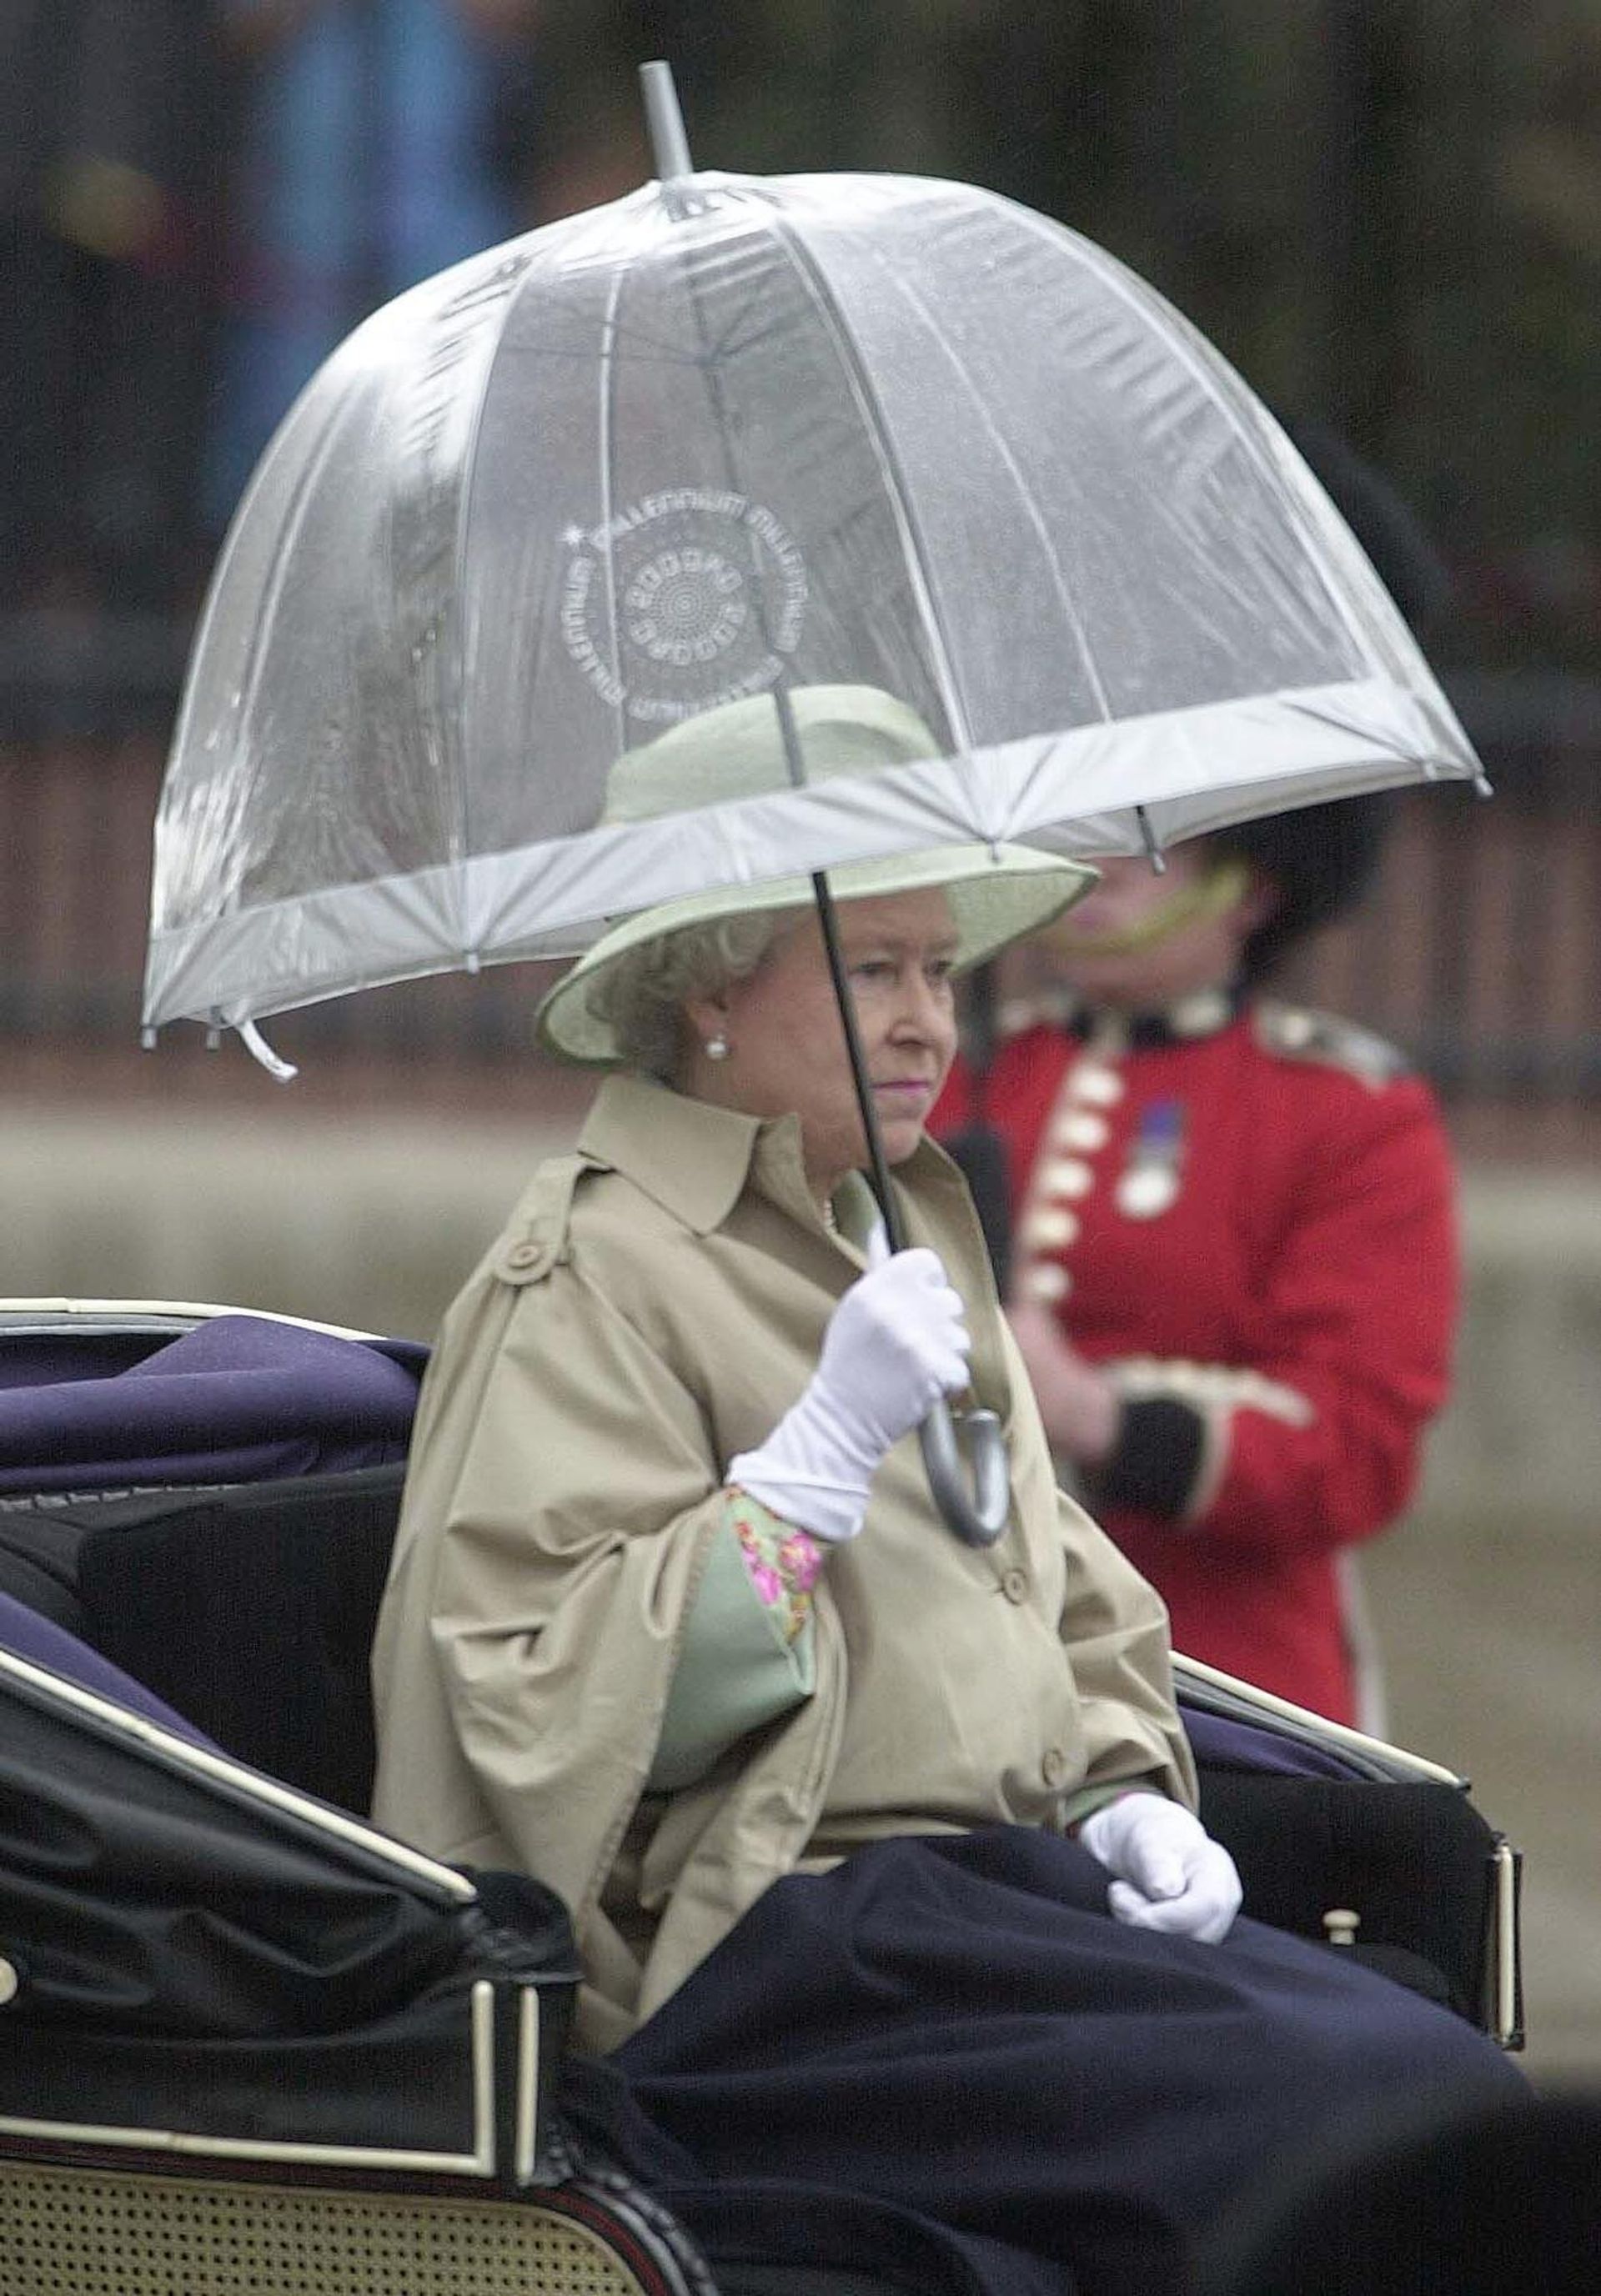 Elizabeth trooping the colour